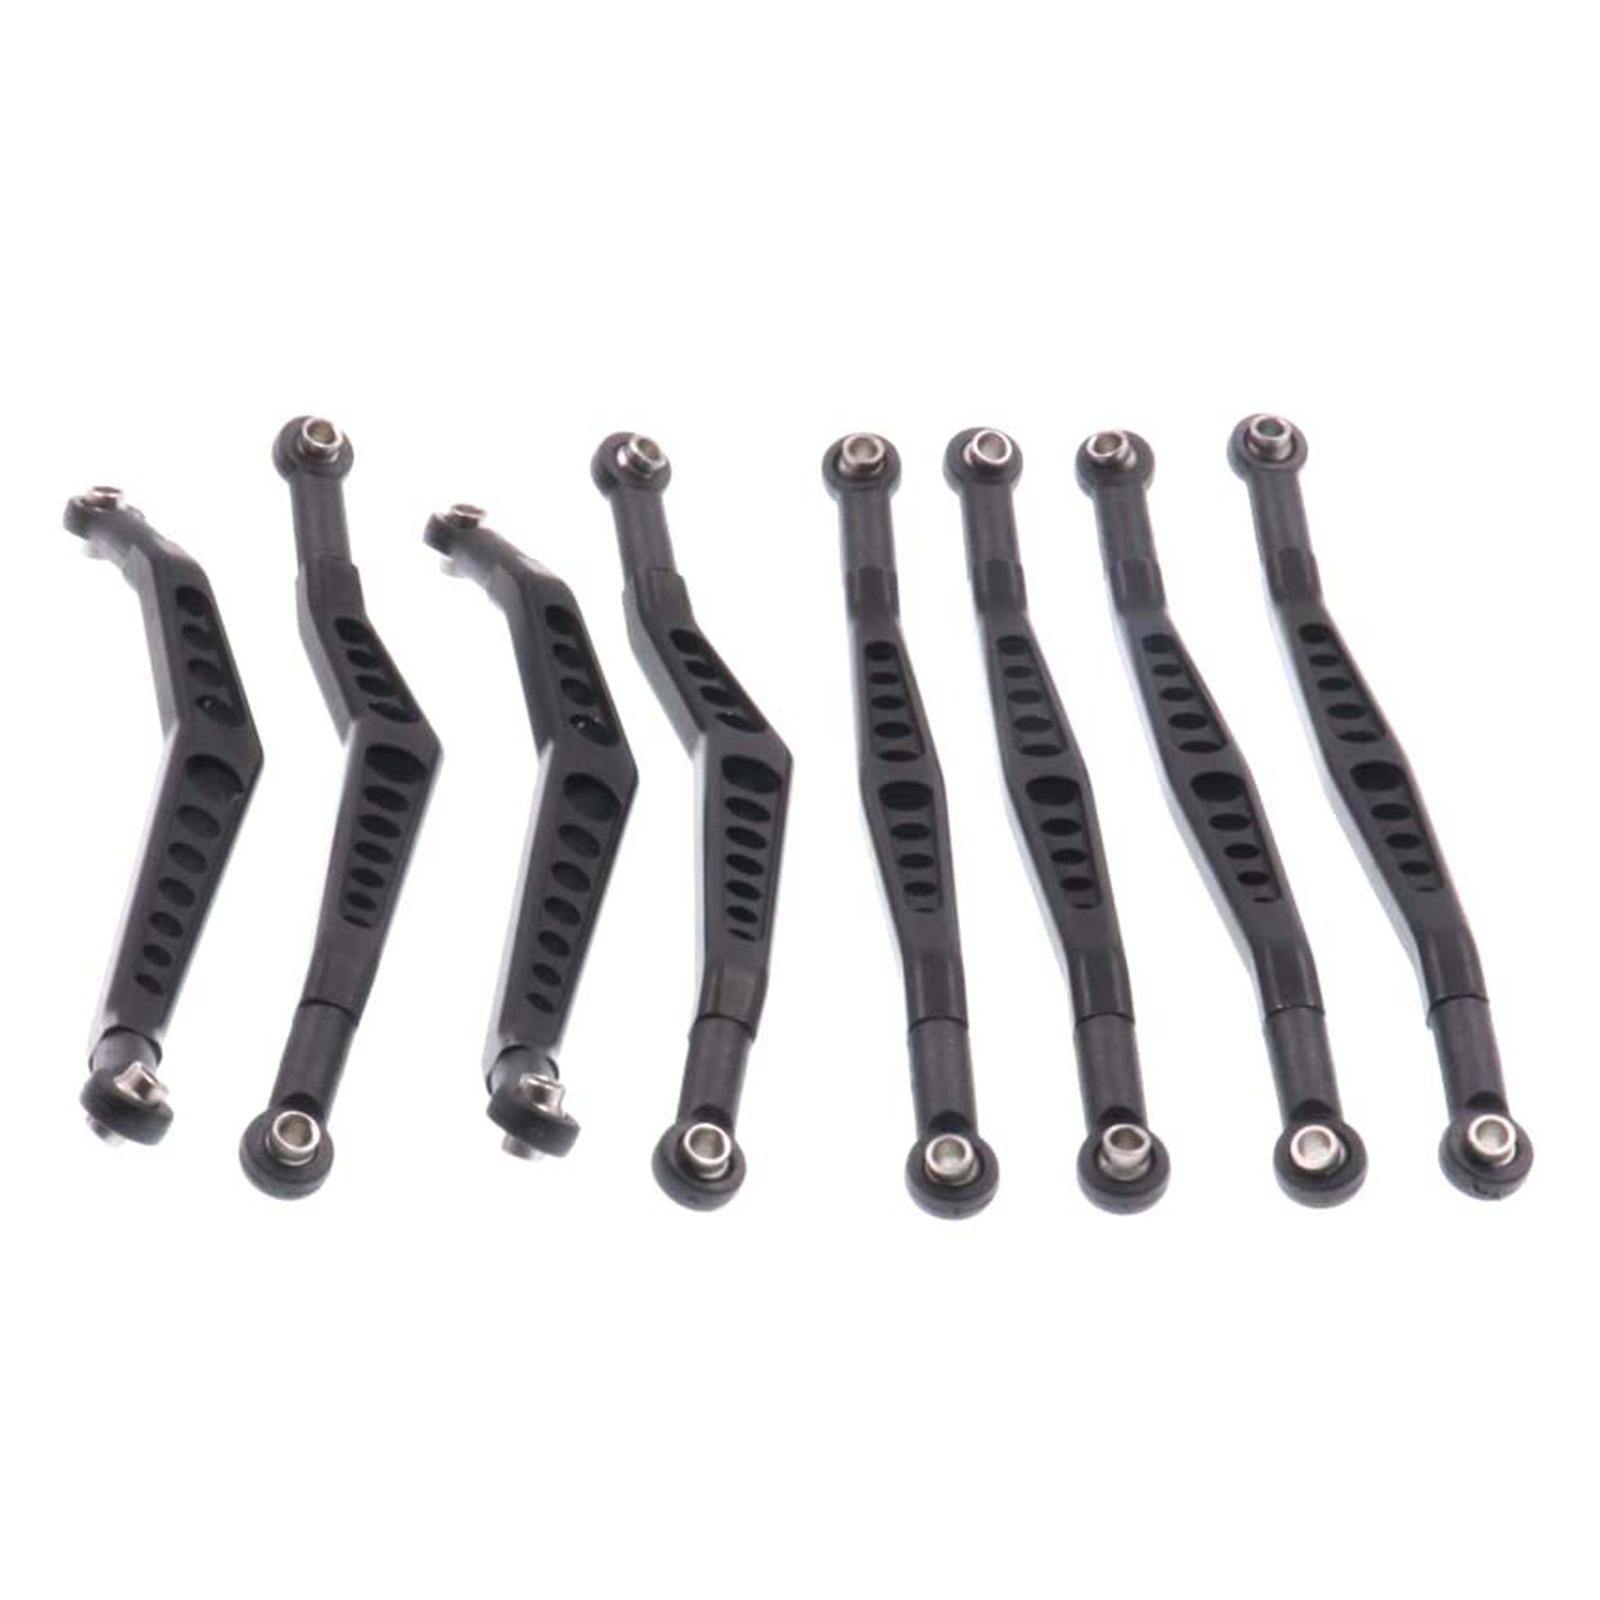 Aluminum Lower & Upper Link Rod Linkage Kit For RC 1/10 Axial Wraith Car Black 